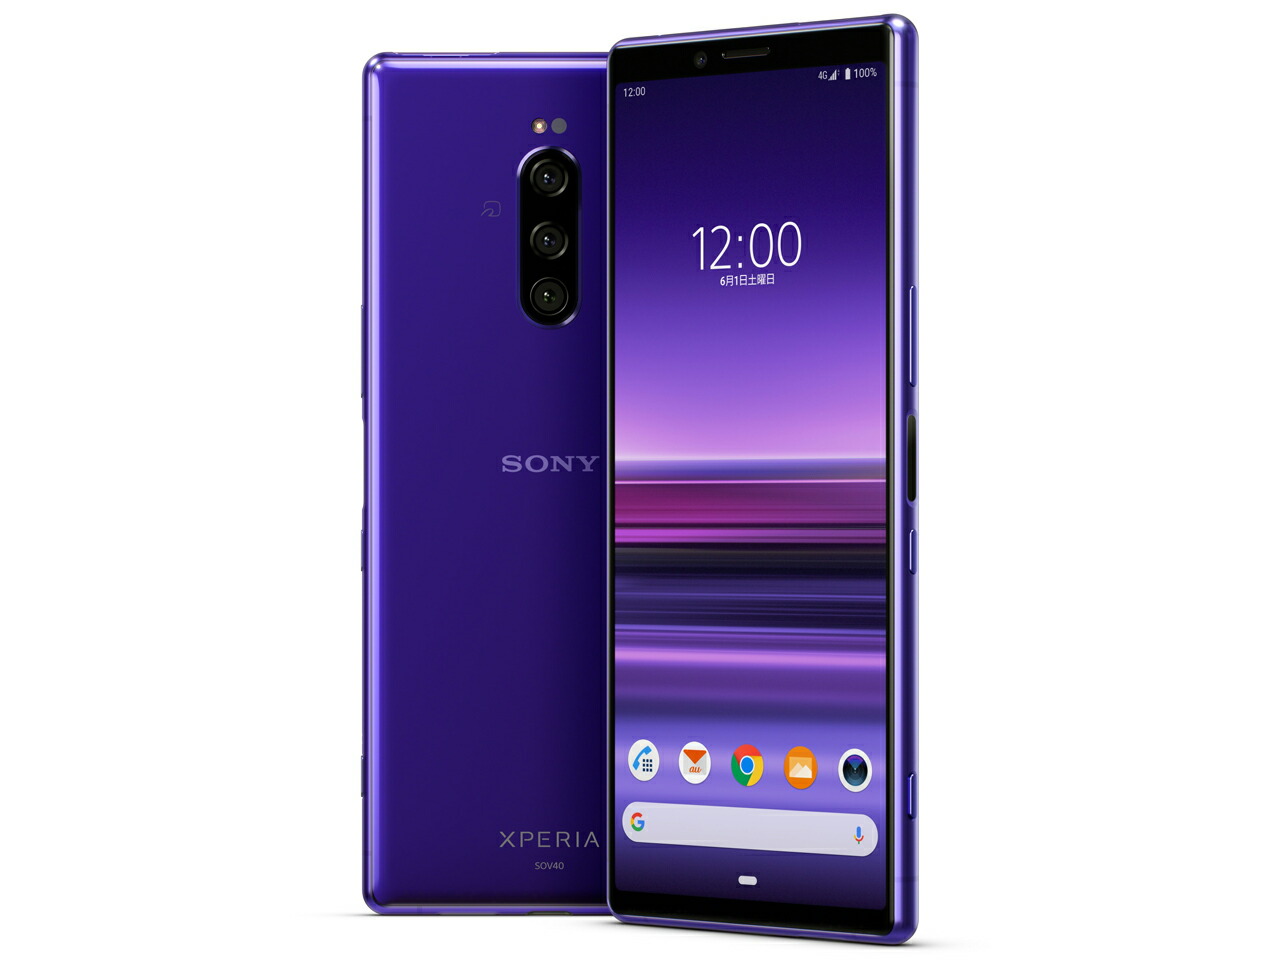 Andソニー  XPERIA １ SOV40 シムロック解除・初期化済  パープル